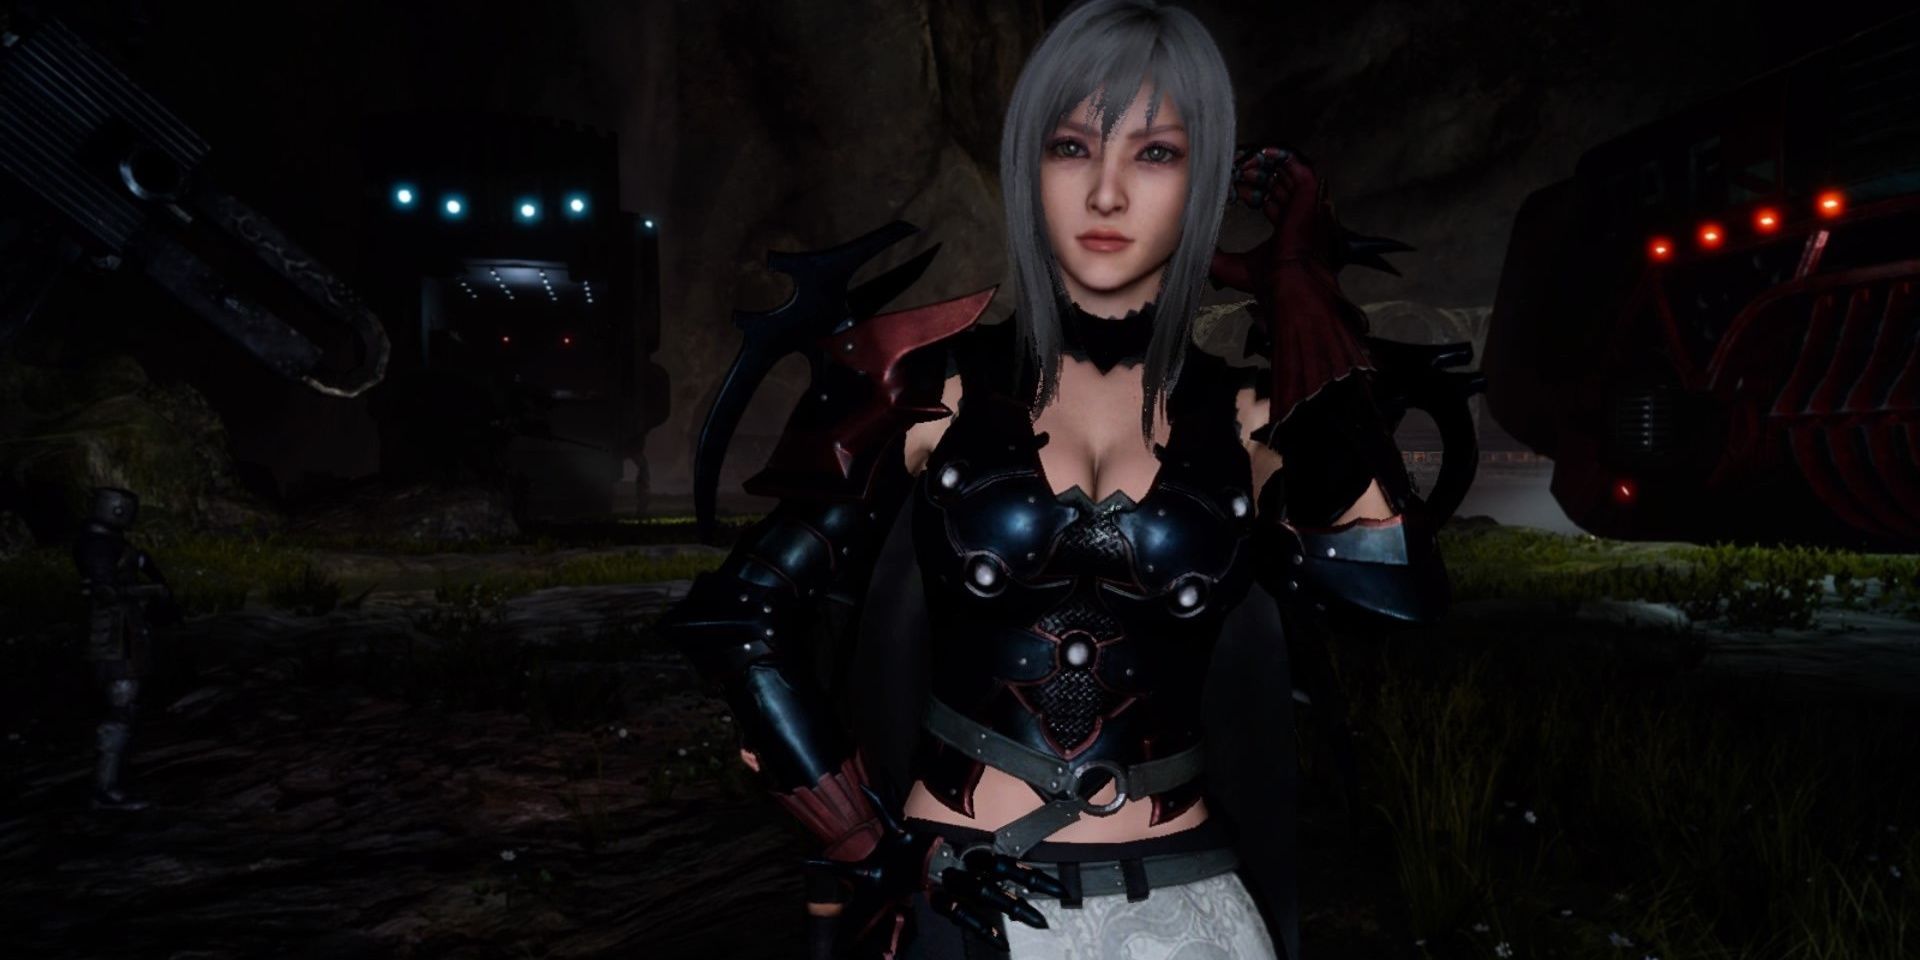 Final Fantasy XV 10 Things About Aranea Highwind Fans Never Knew